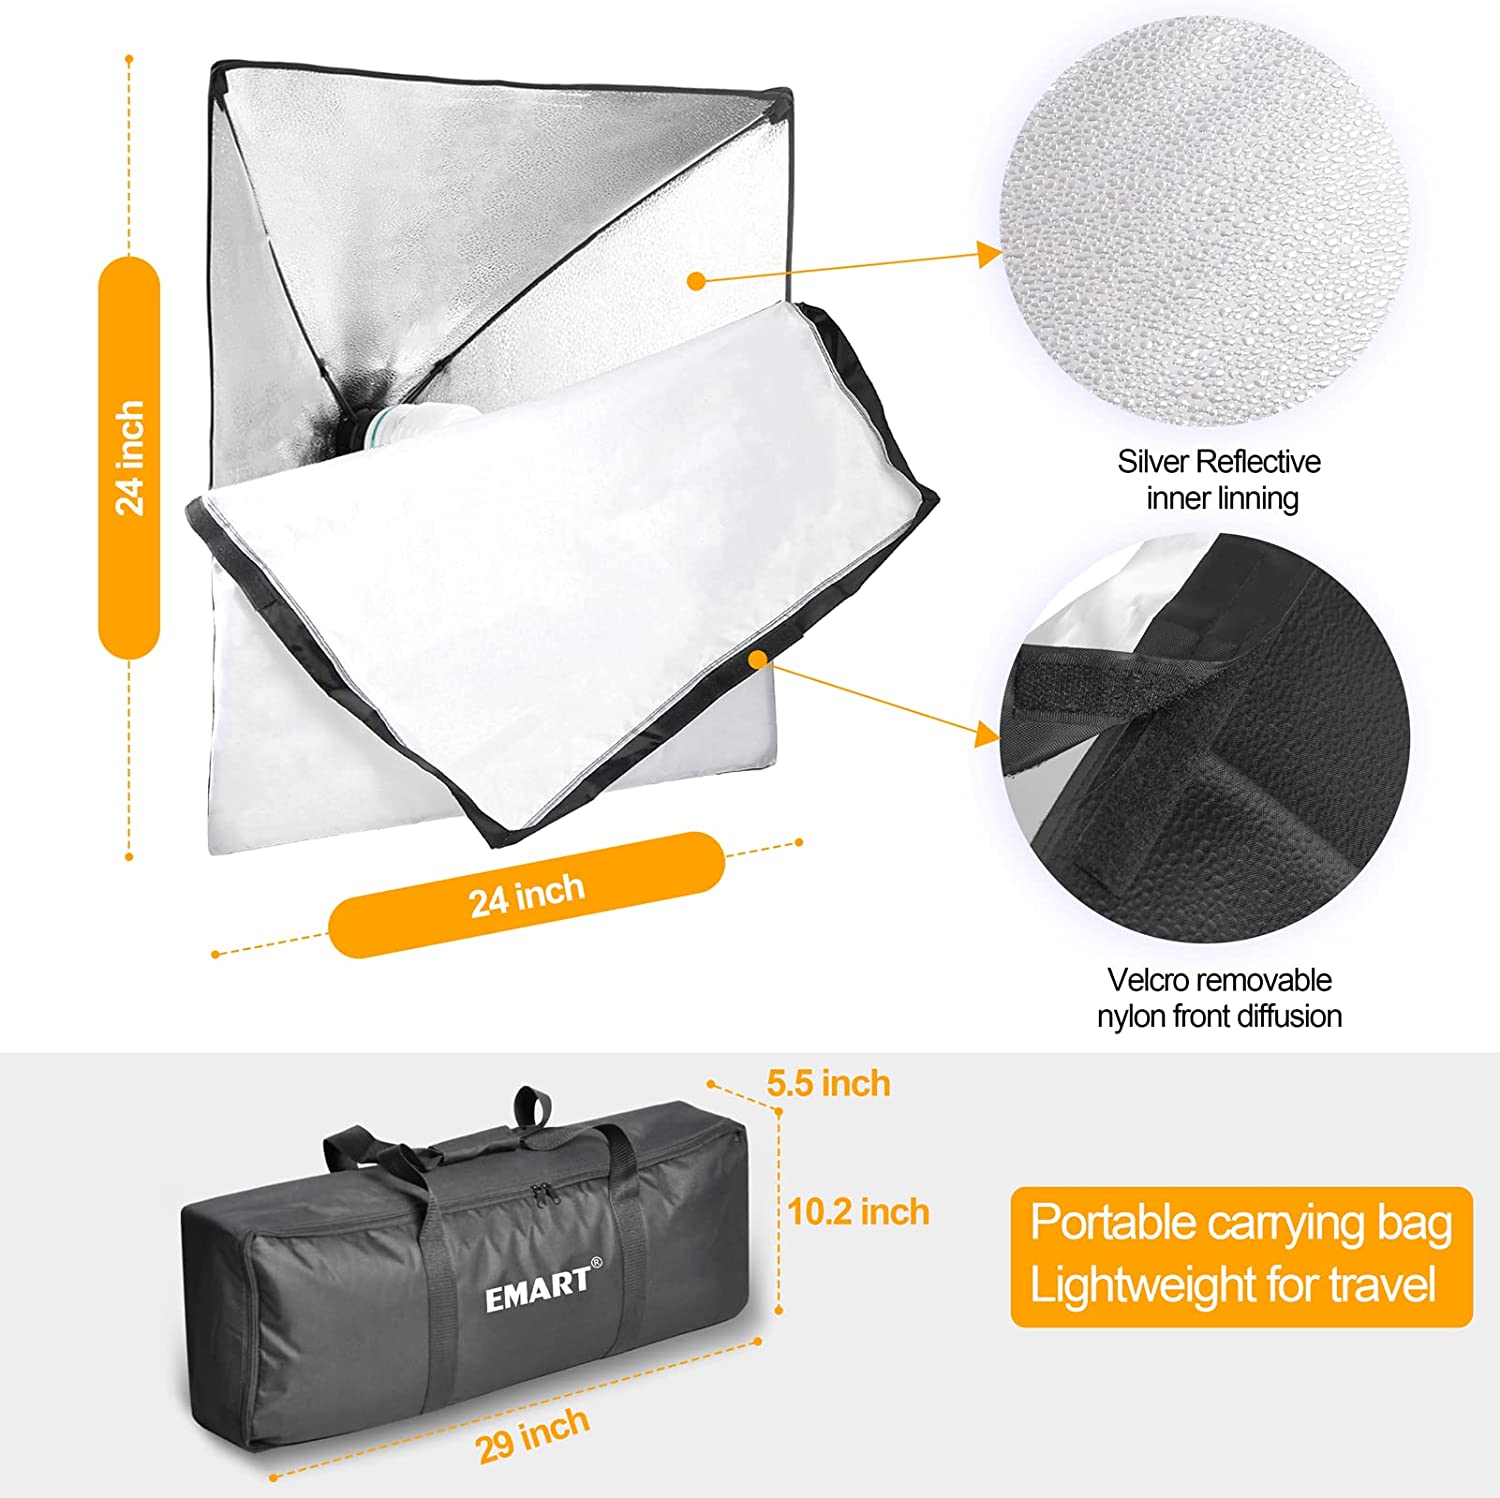 Ideas Illuminated 24"x24" 1000W Softbox Lighting Kit with Reflector, Photography Soft Box Continuous Light Set with Photo Studio Bulbs - EMART INTERNATIONAL, INC (Official Website)